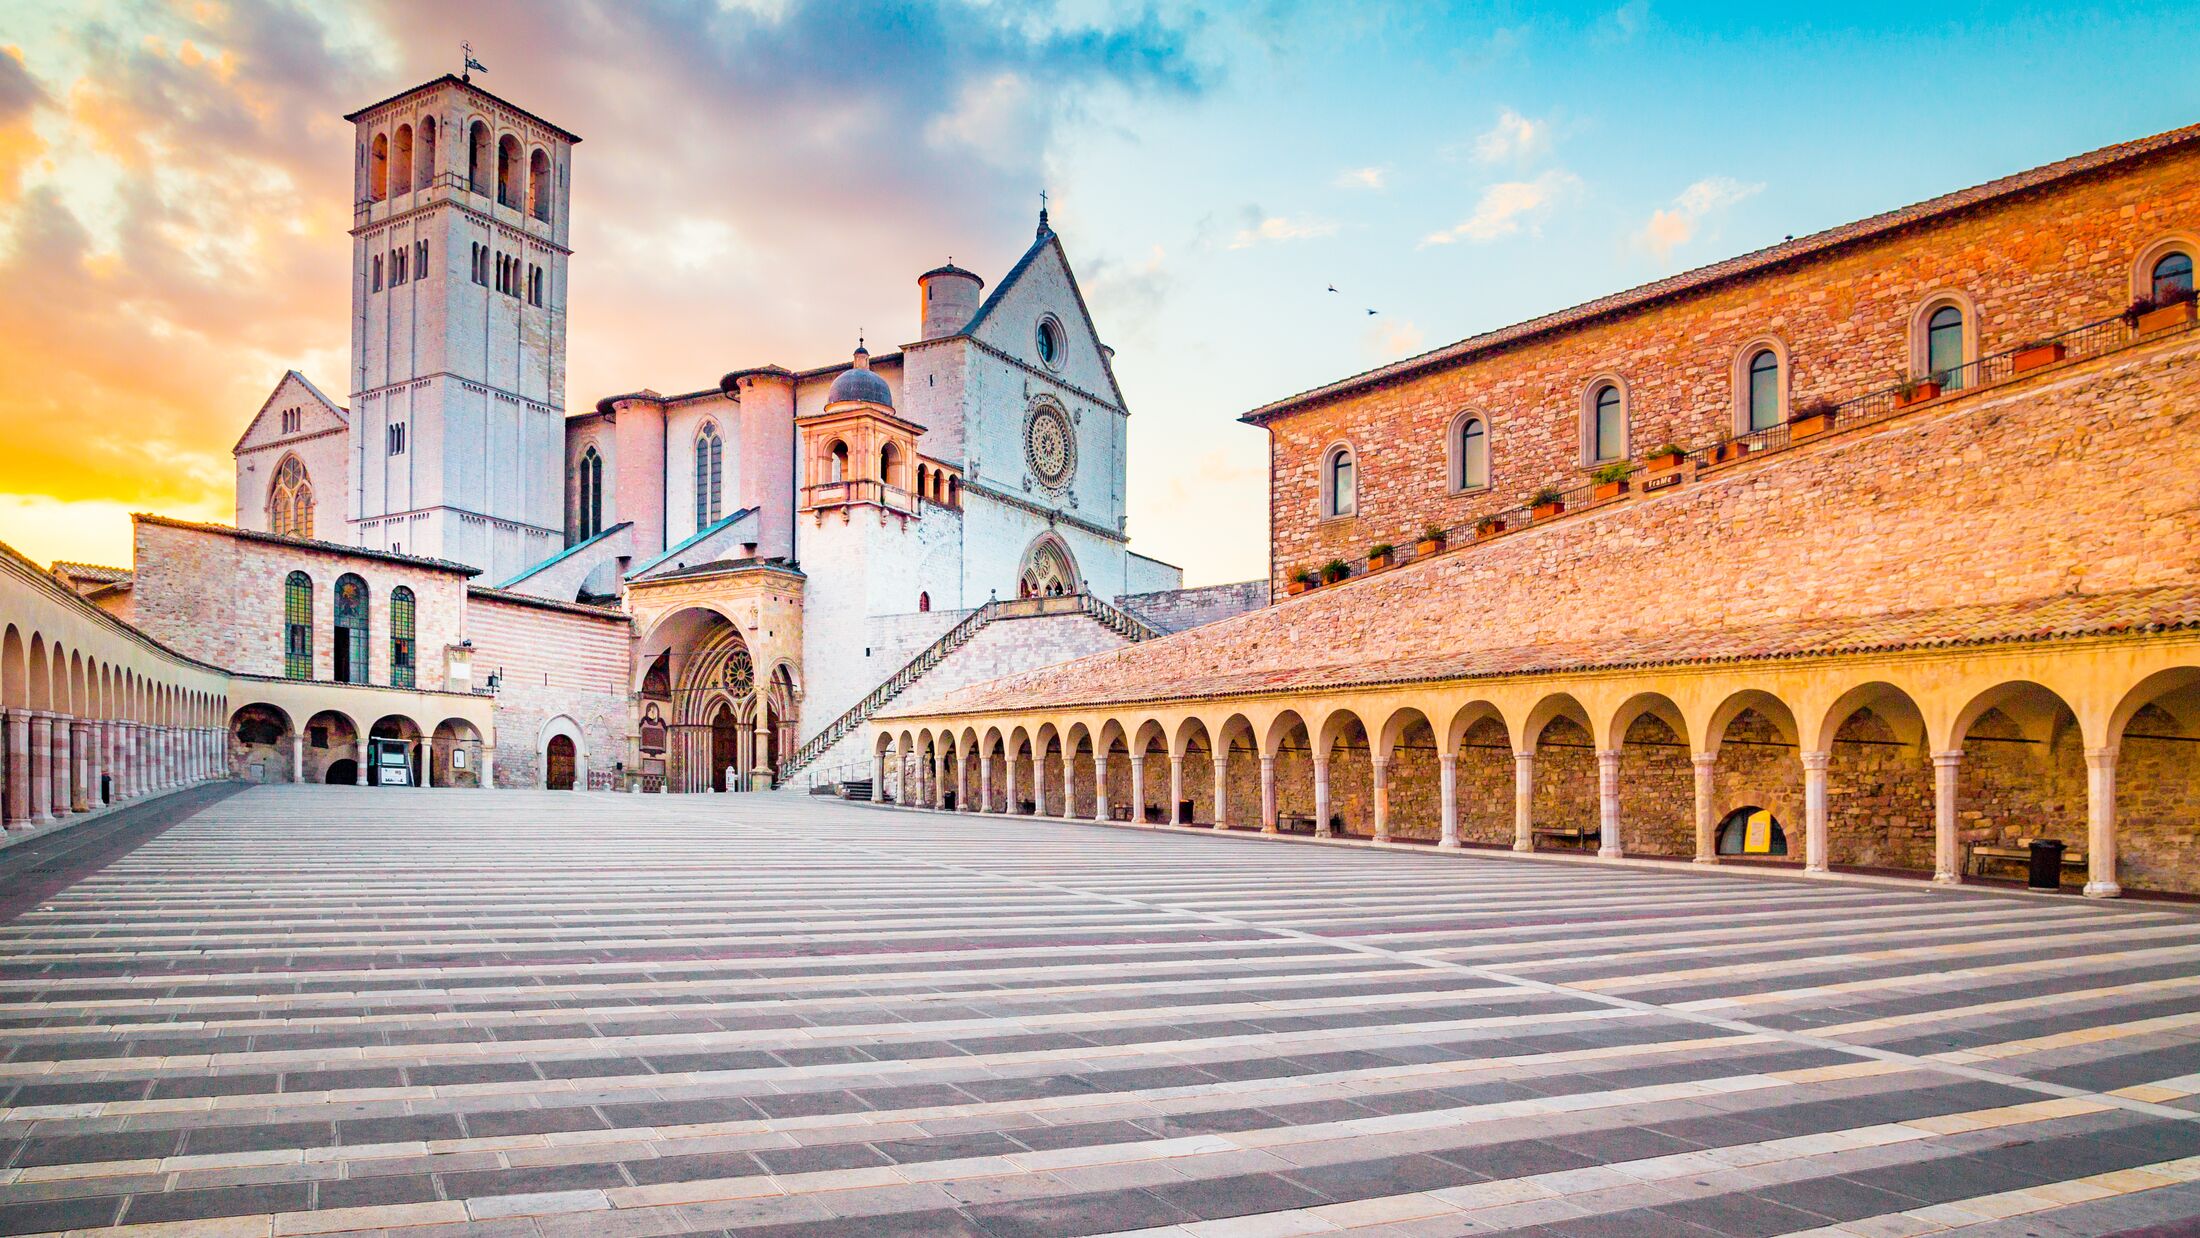 Famous Basilica of St. Francis of Assisi (Basilica Papale di San Francesco) with Lower Plaza at sunset in Assisi, Umbria, Italy